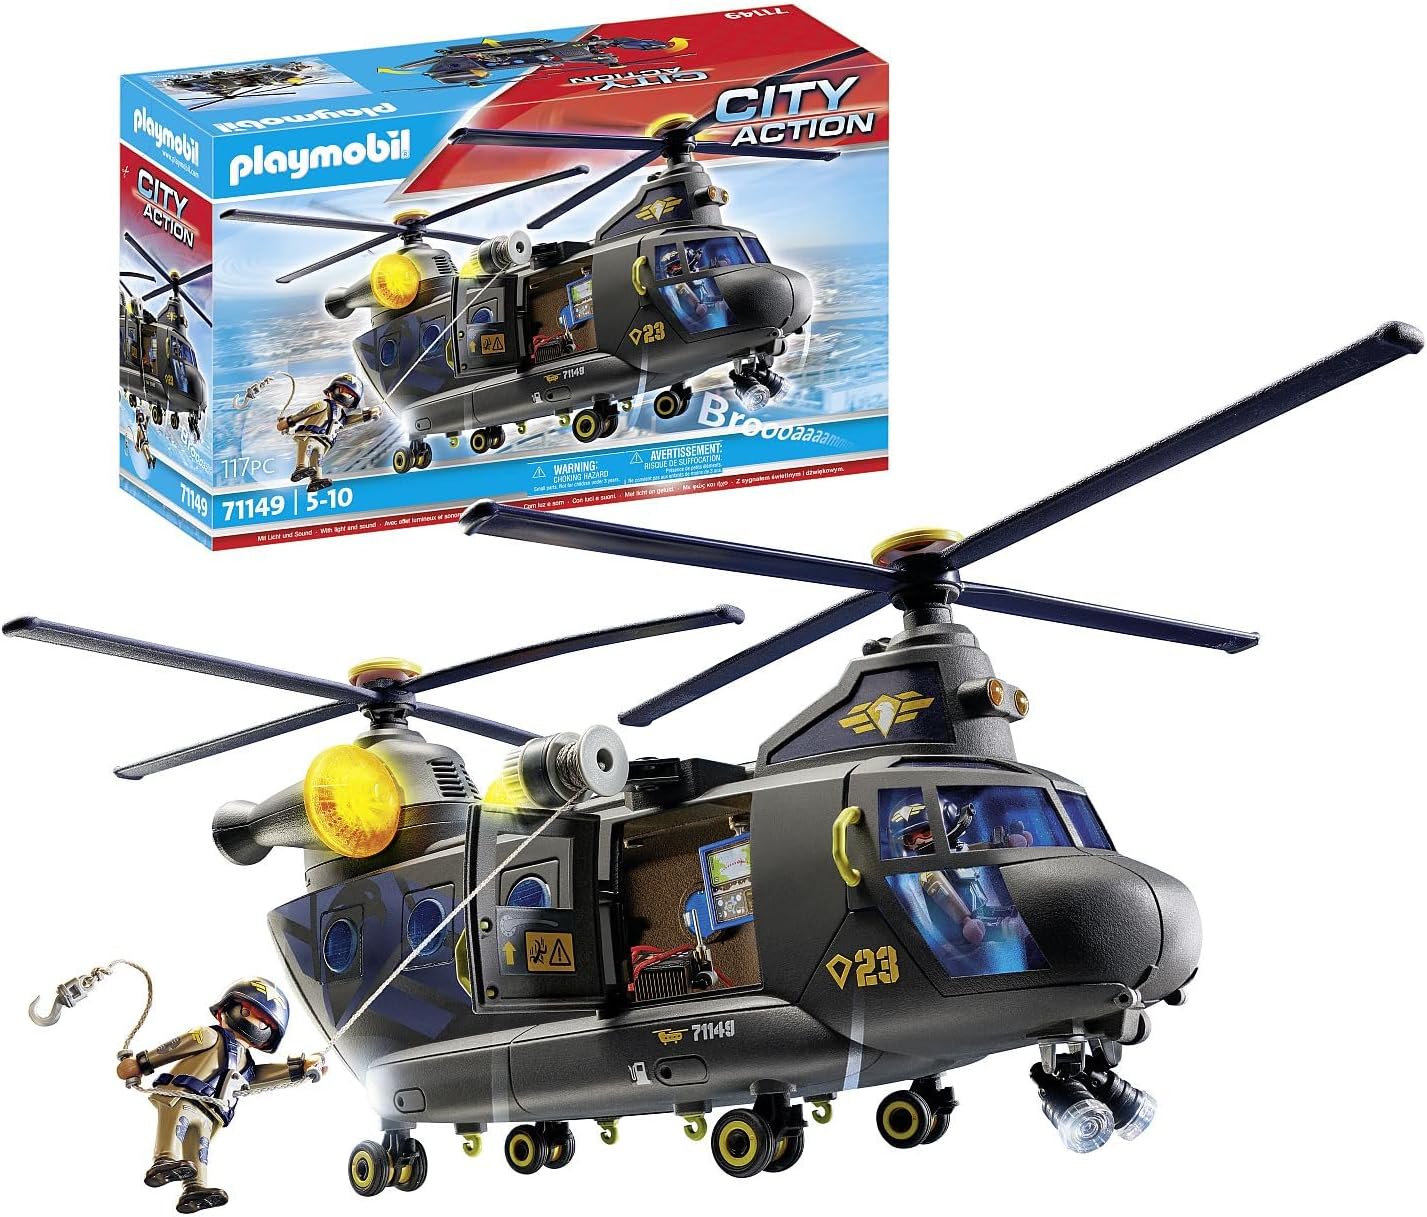 PLAYMOBIL City Action 71149 SWAT Rescue Helicopter, Detailed SWAT Rescue Helicopter with Light and Sound Module, Toy for Children from 5 Years